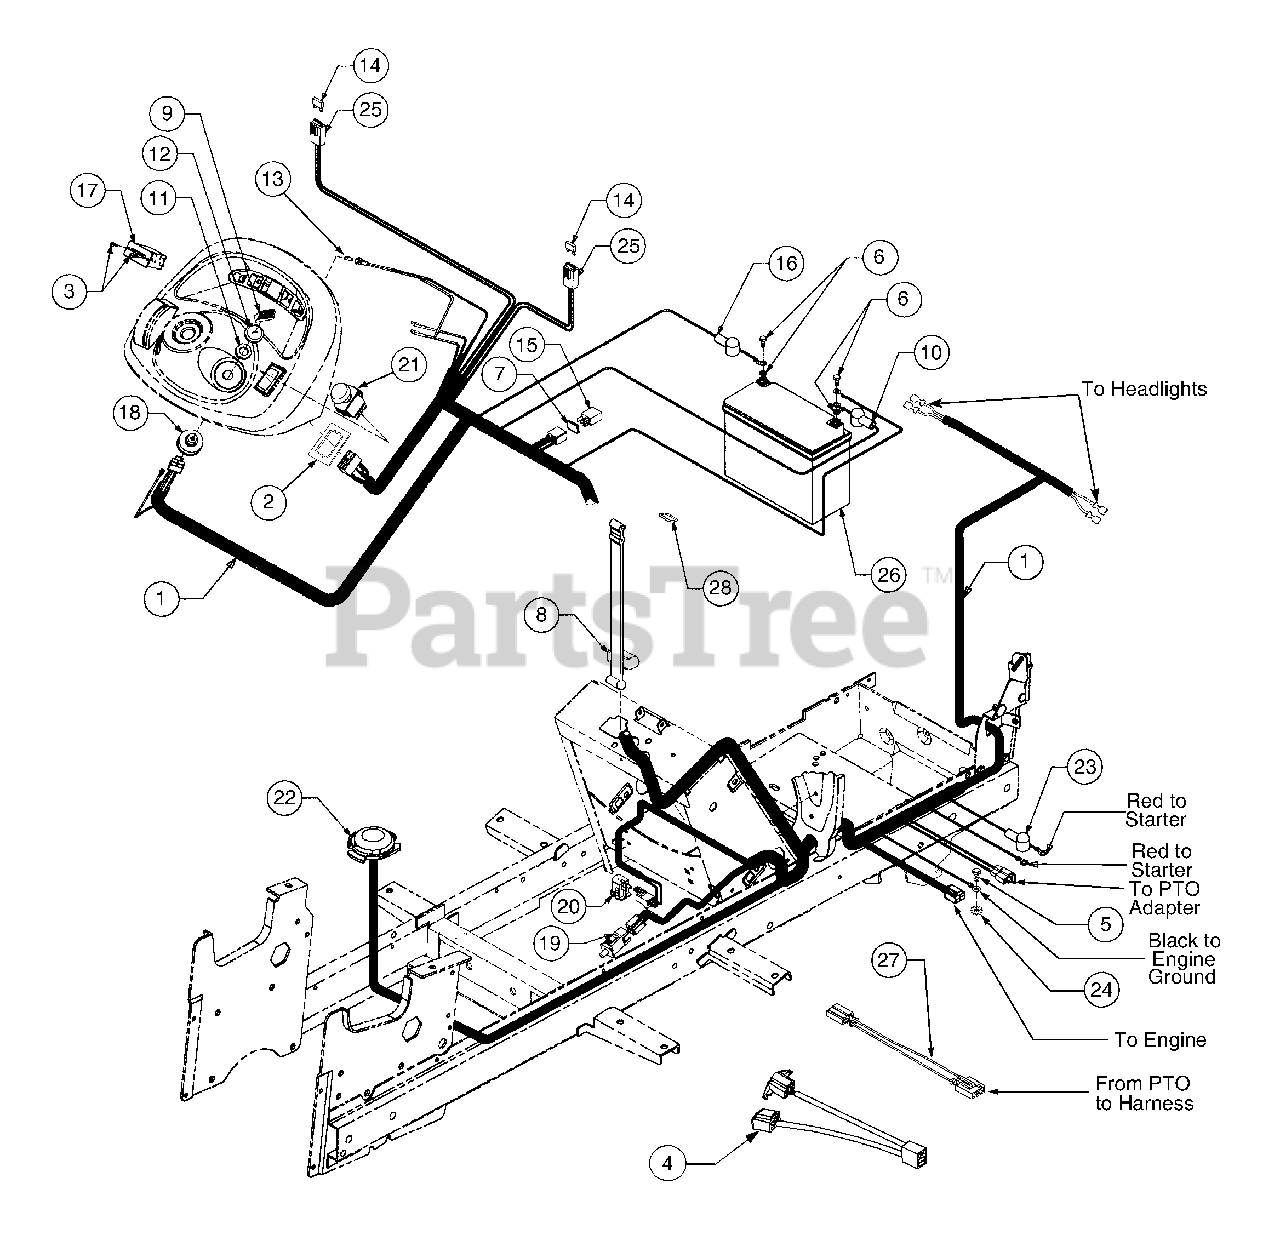 Cub Cadet 2166 13a 214g100 Cub Cadet Garden Tractor Battery Electrical Components And Switches Parts Lookup With Diagrams Partstree